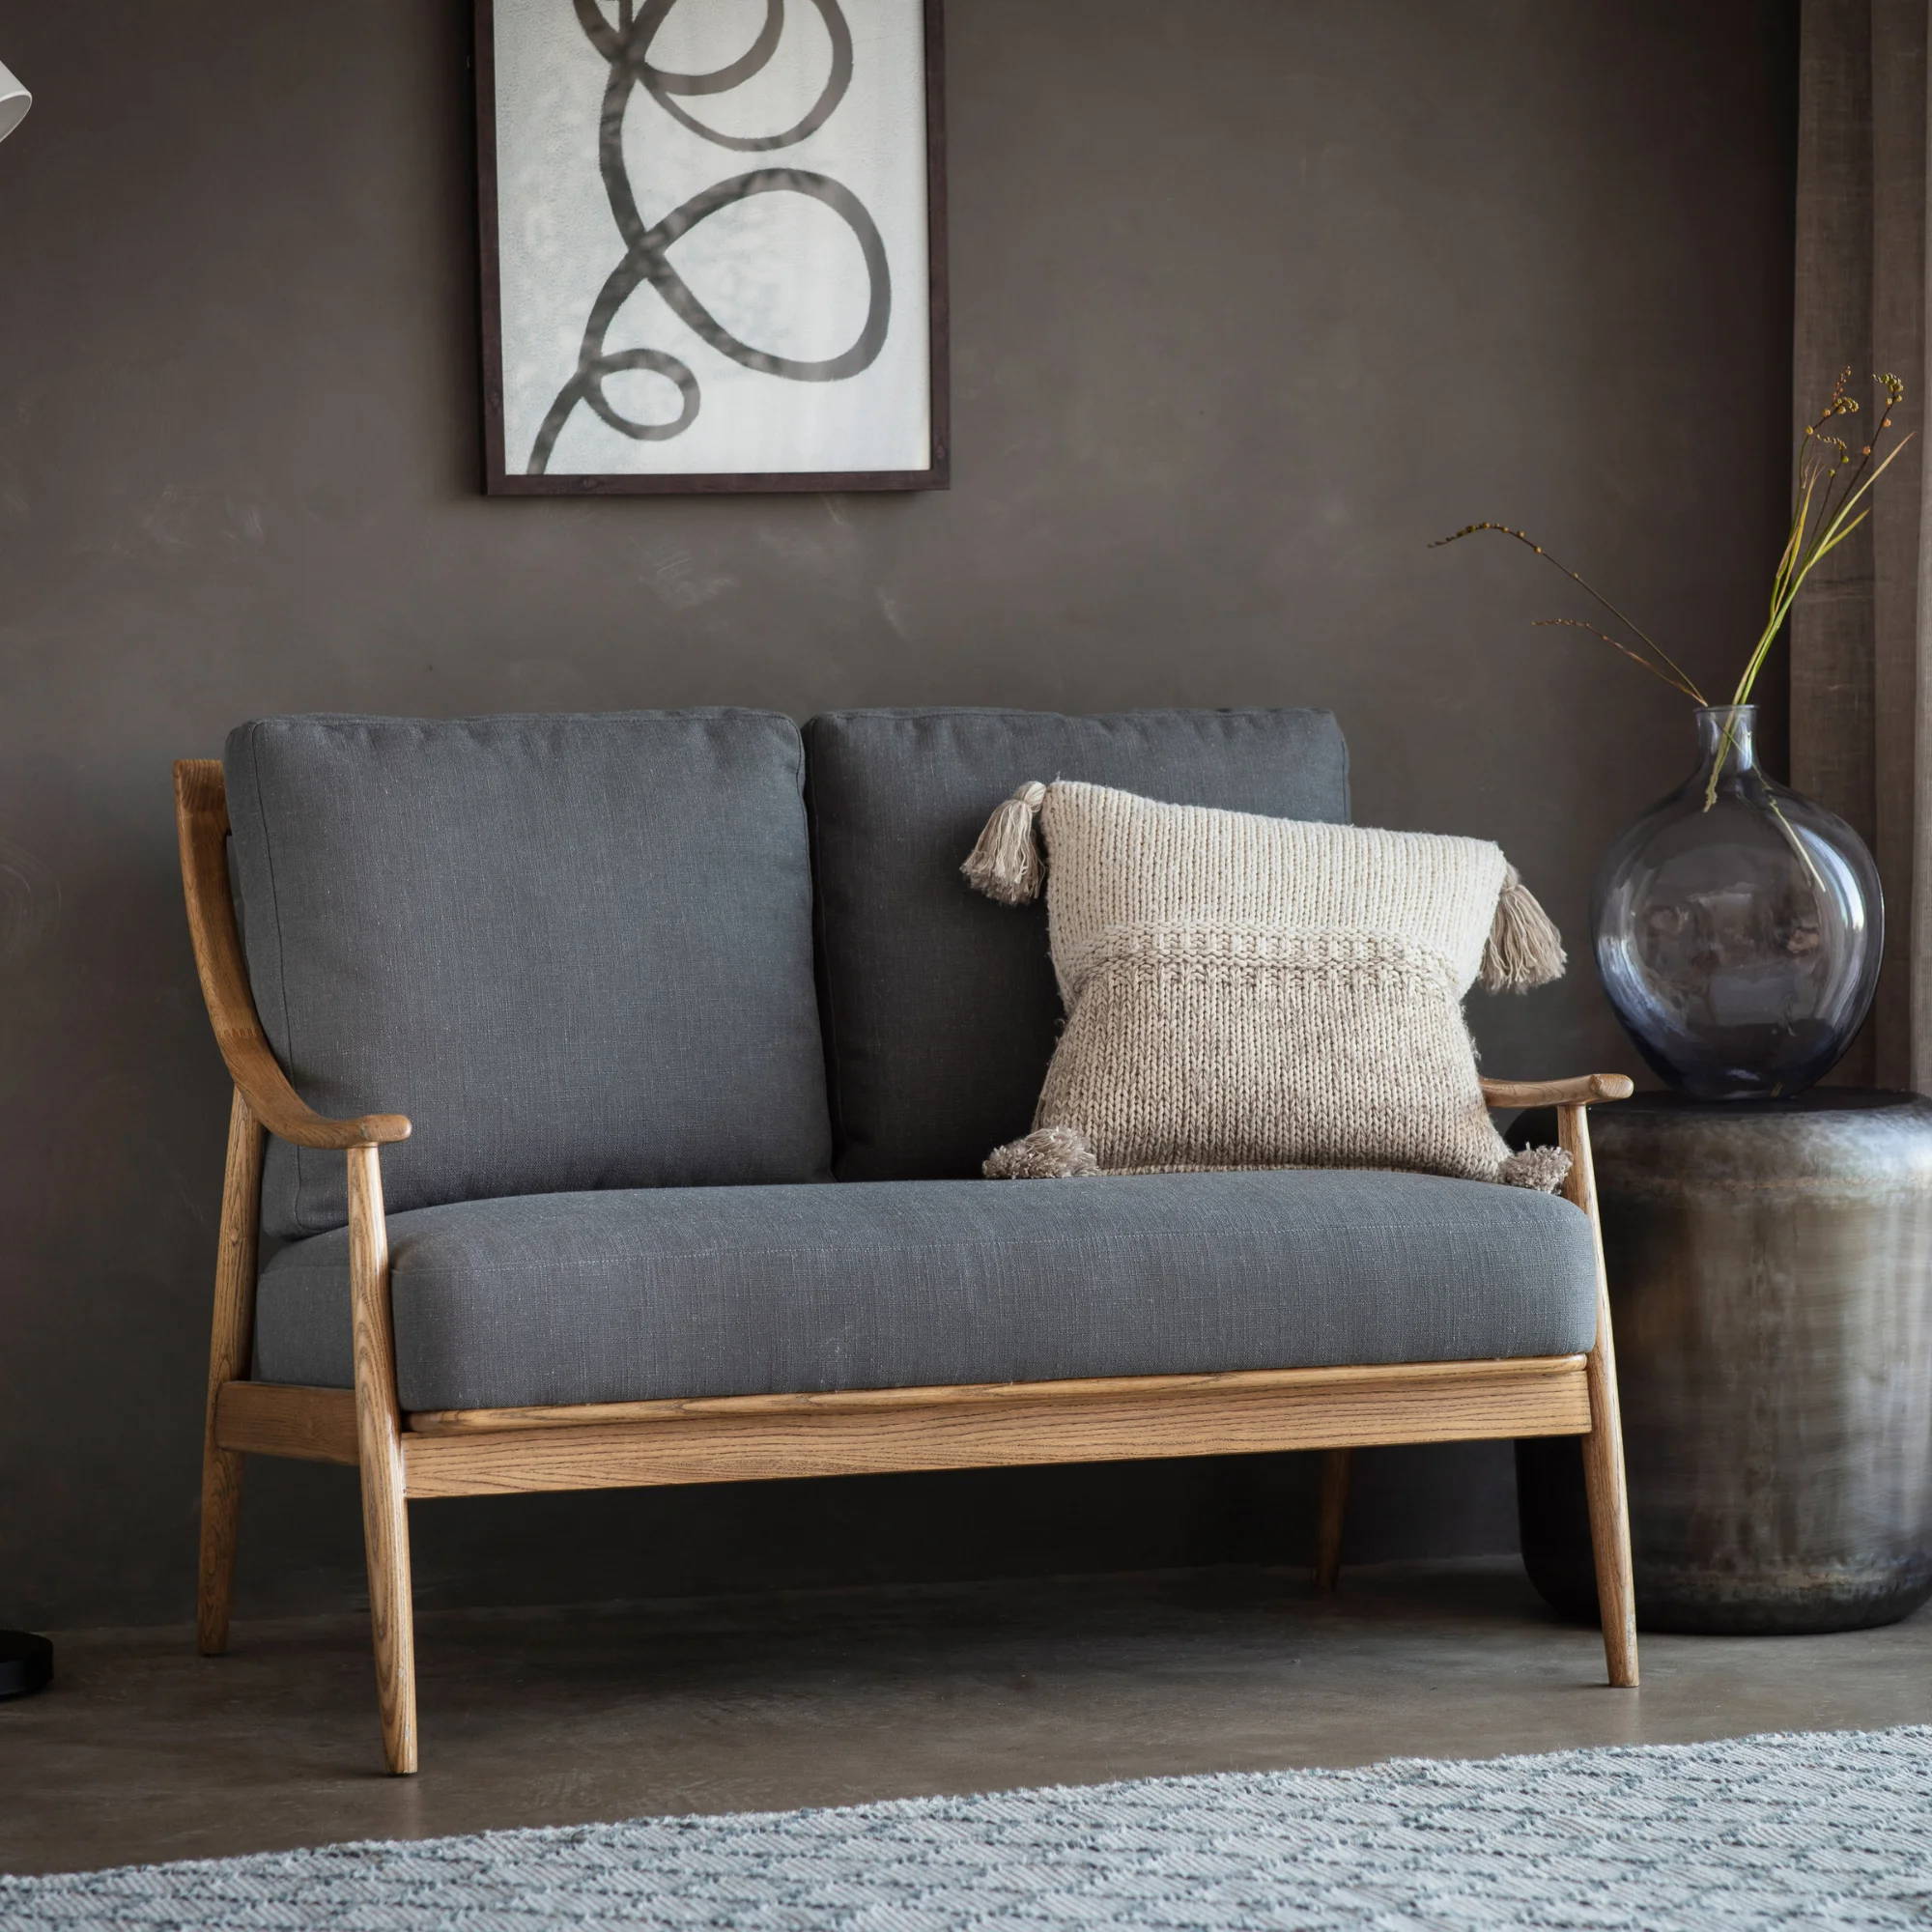 BROCK 2 seat mid century sofa with solid wood frame and grey linen upholstery | MalletandPlane.com